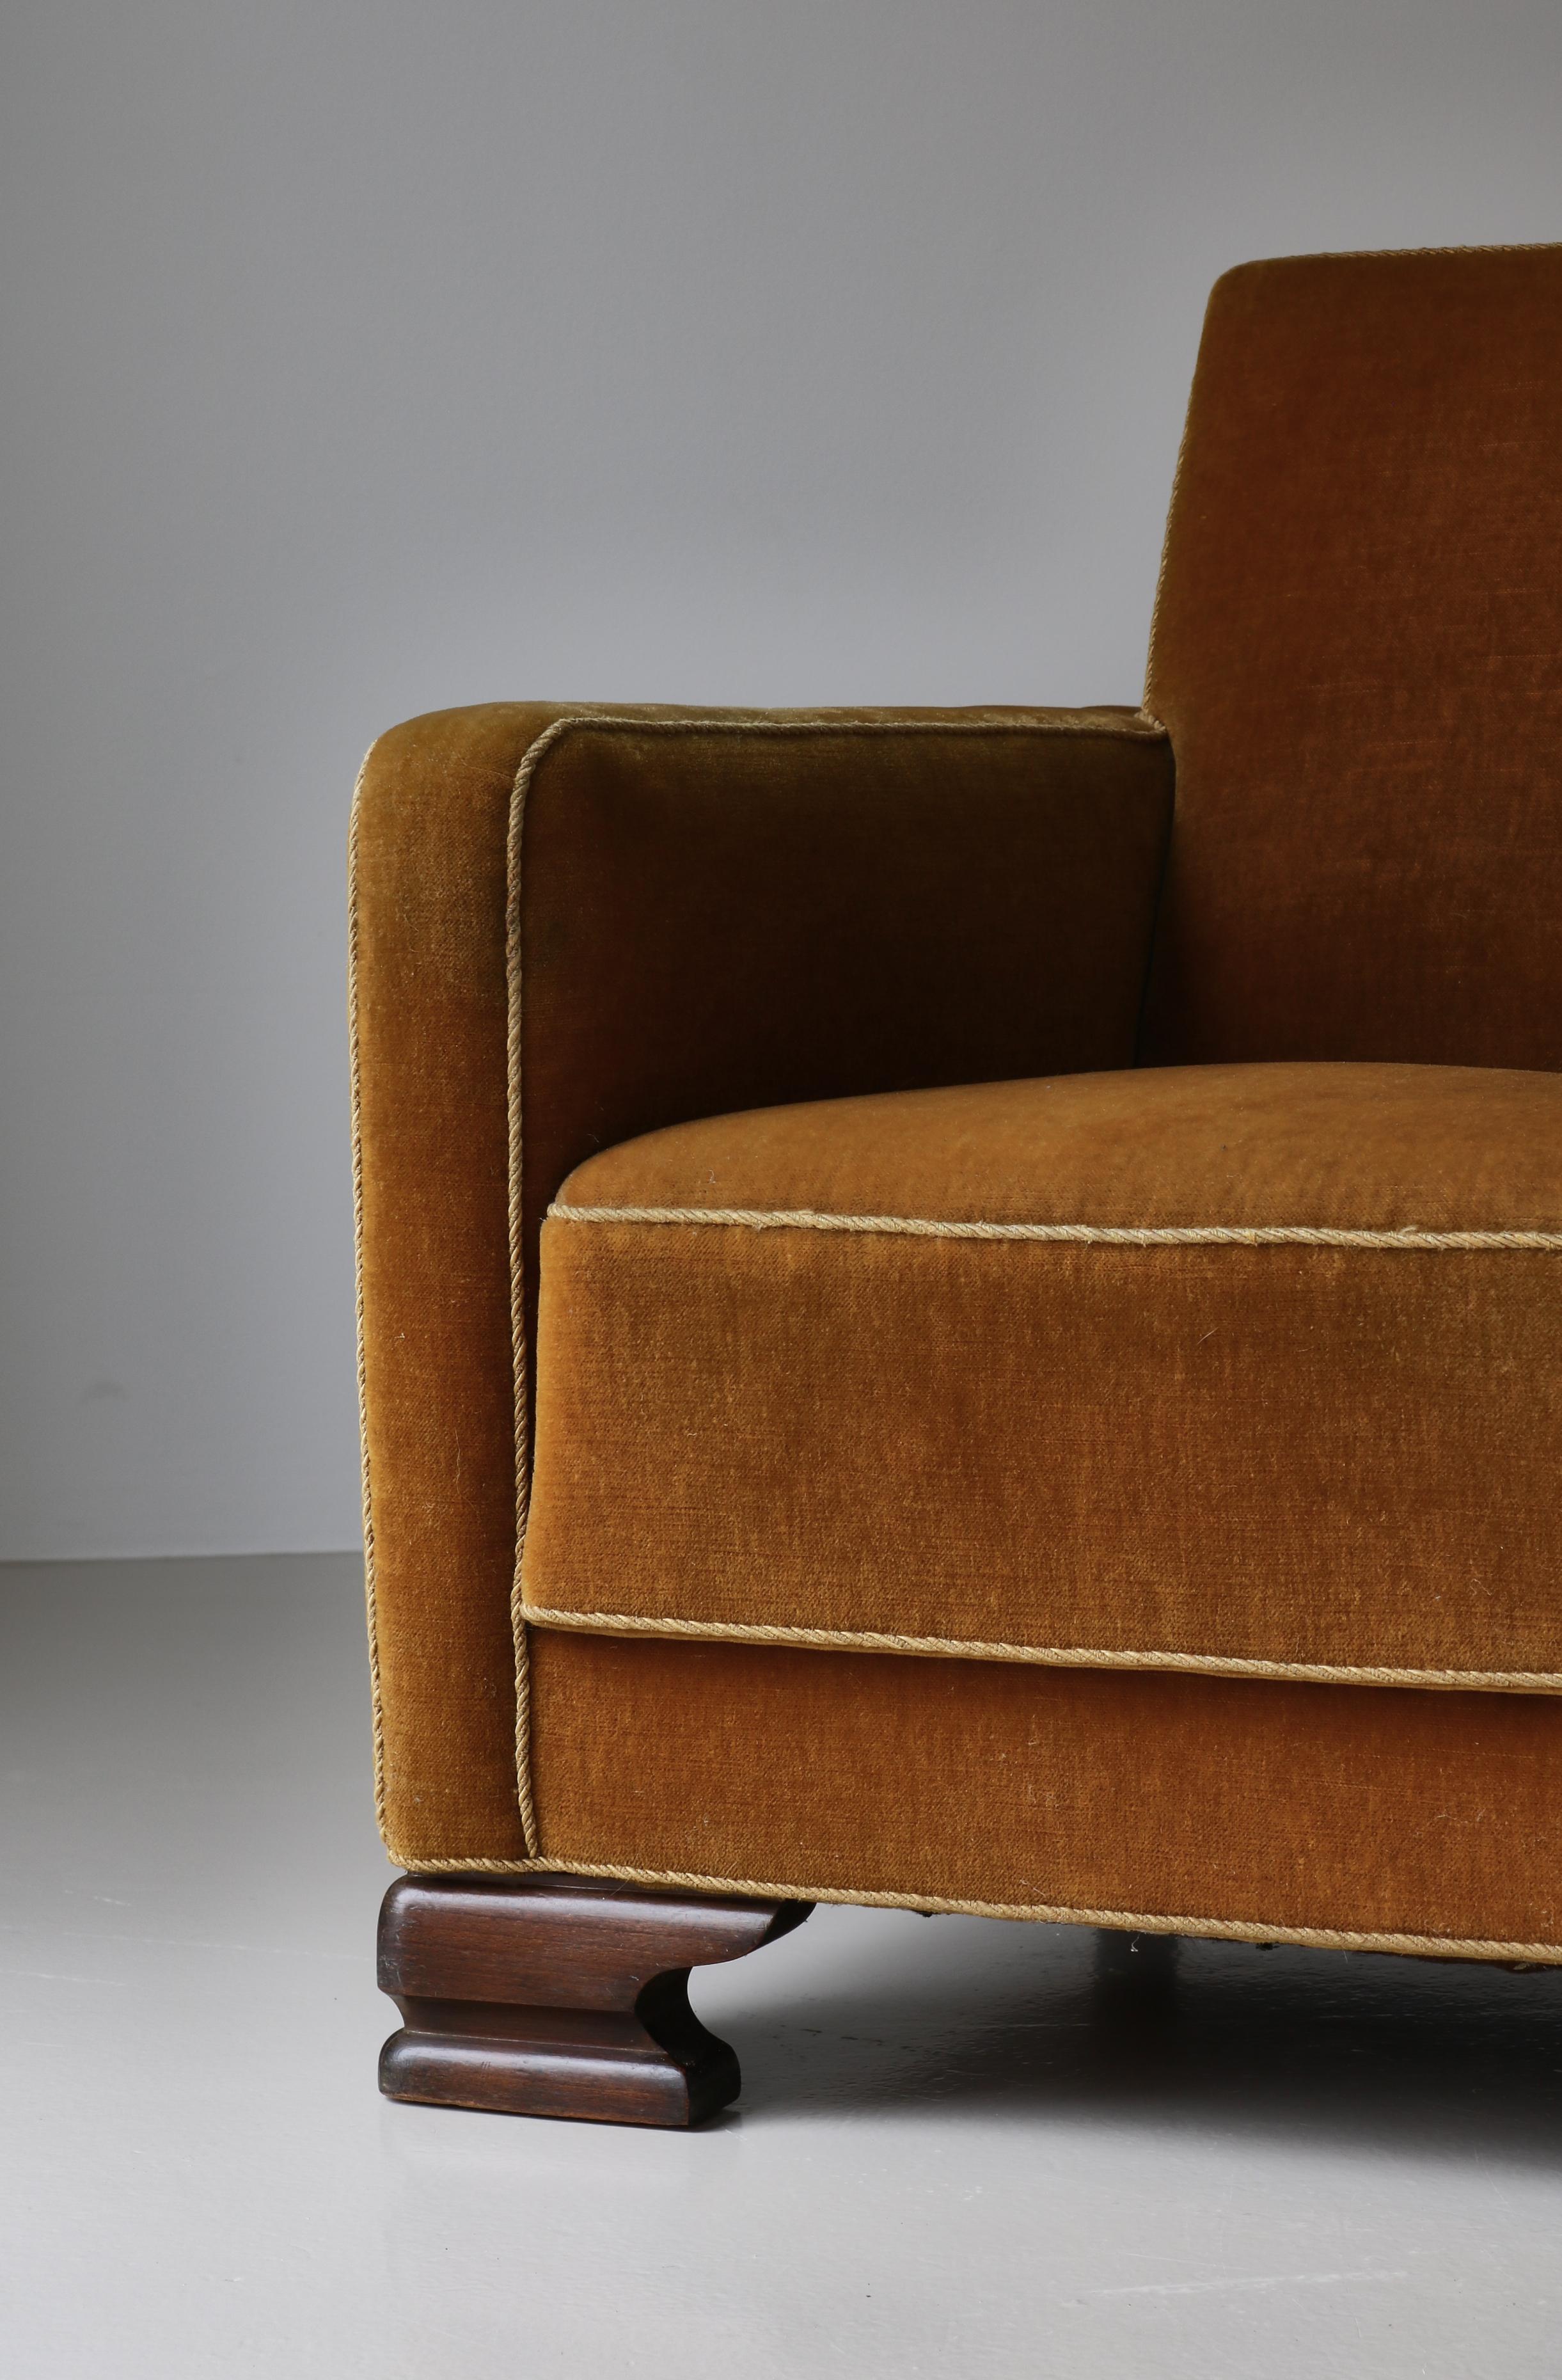 Pair of Danish Cabinetmaker Art Deco Lounge Chairs in Yellow Mohair, 1930s For Sale 10